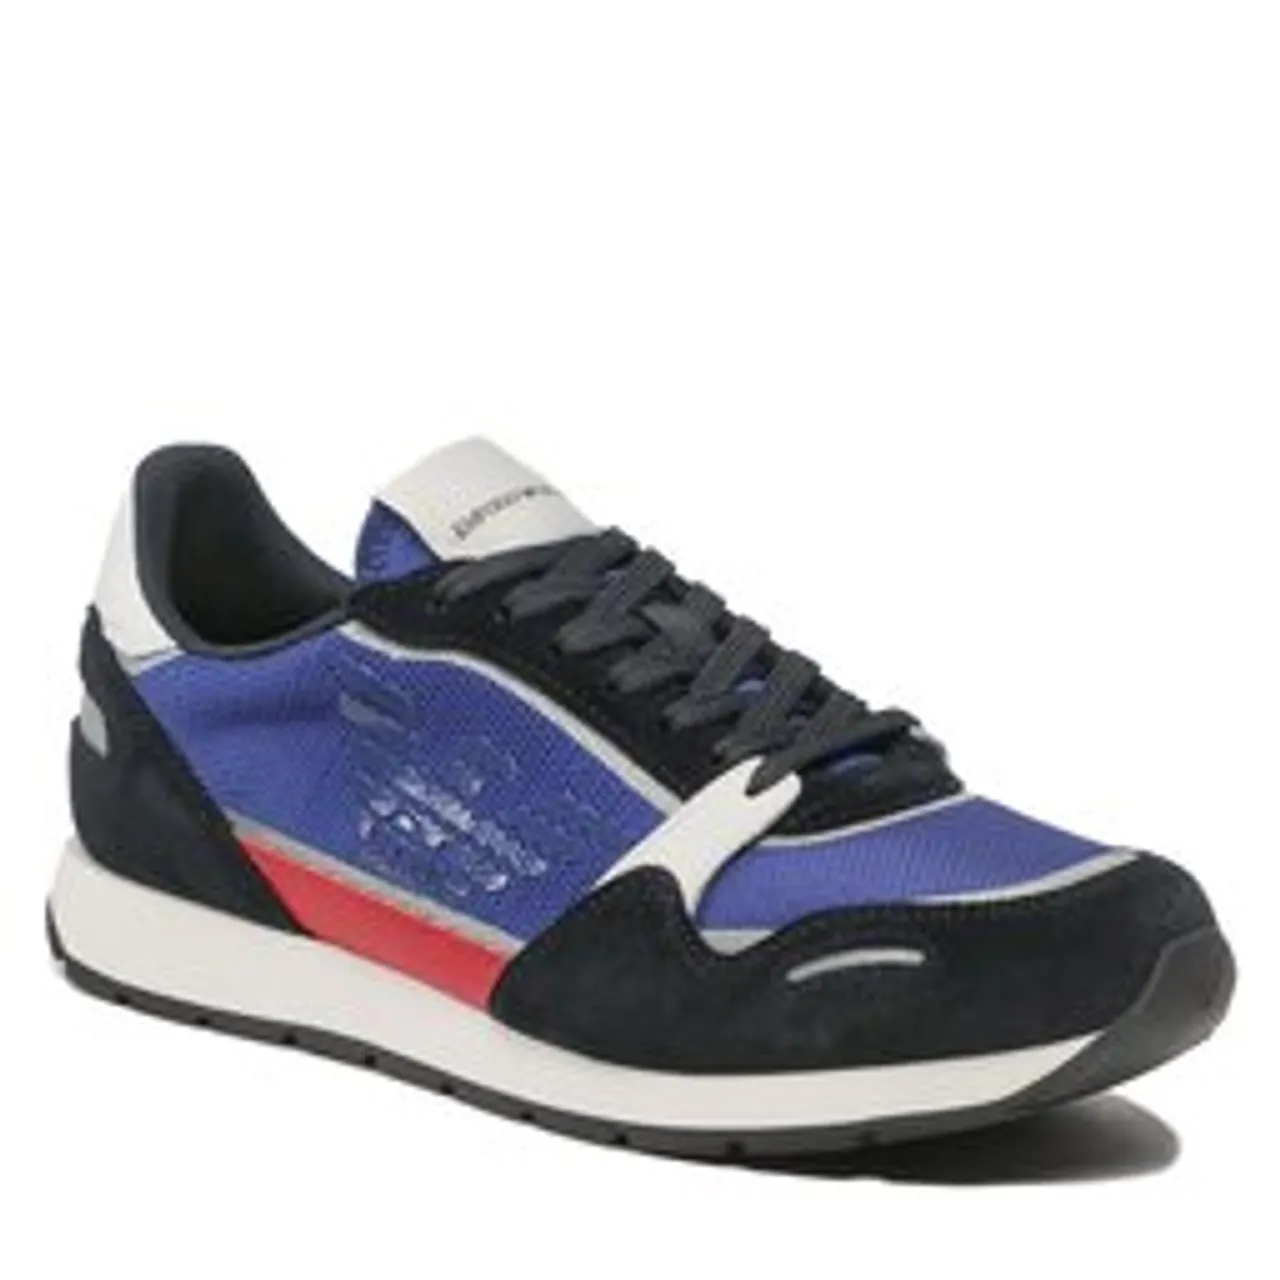 Sneakers Emporio Armani X4X537 XM678 S155 Navy/Bluet/Of Wh/Red